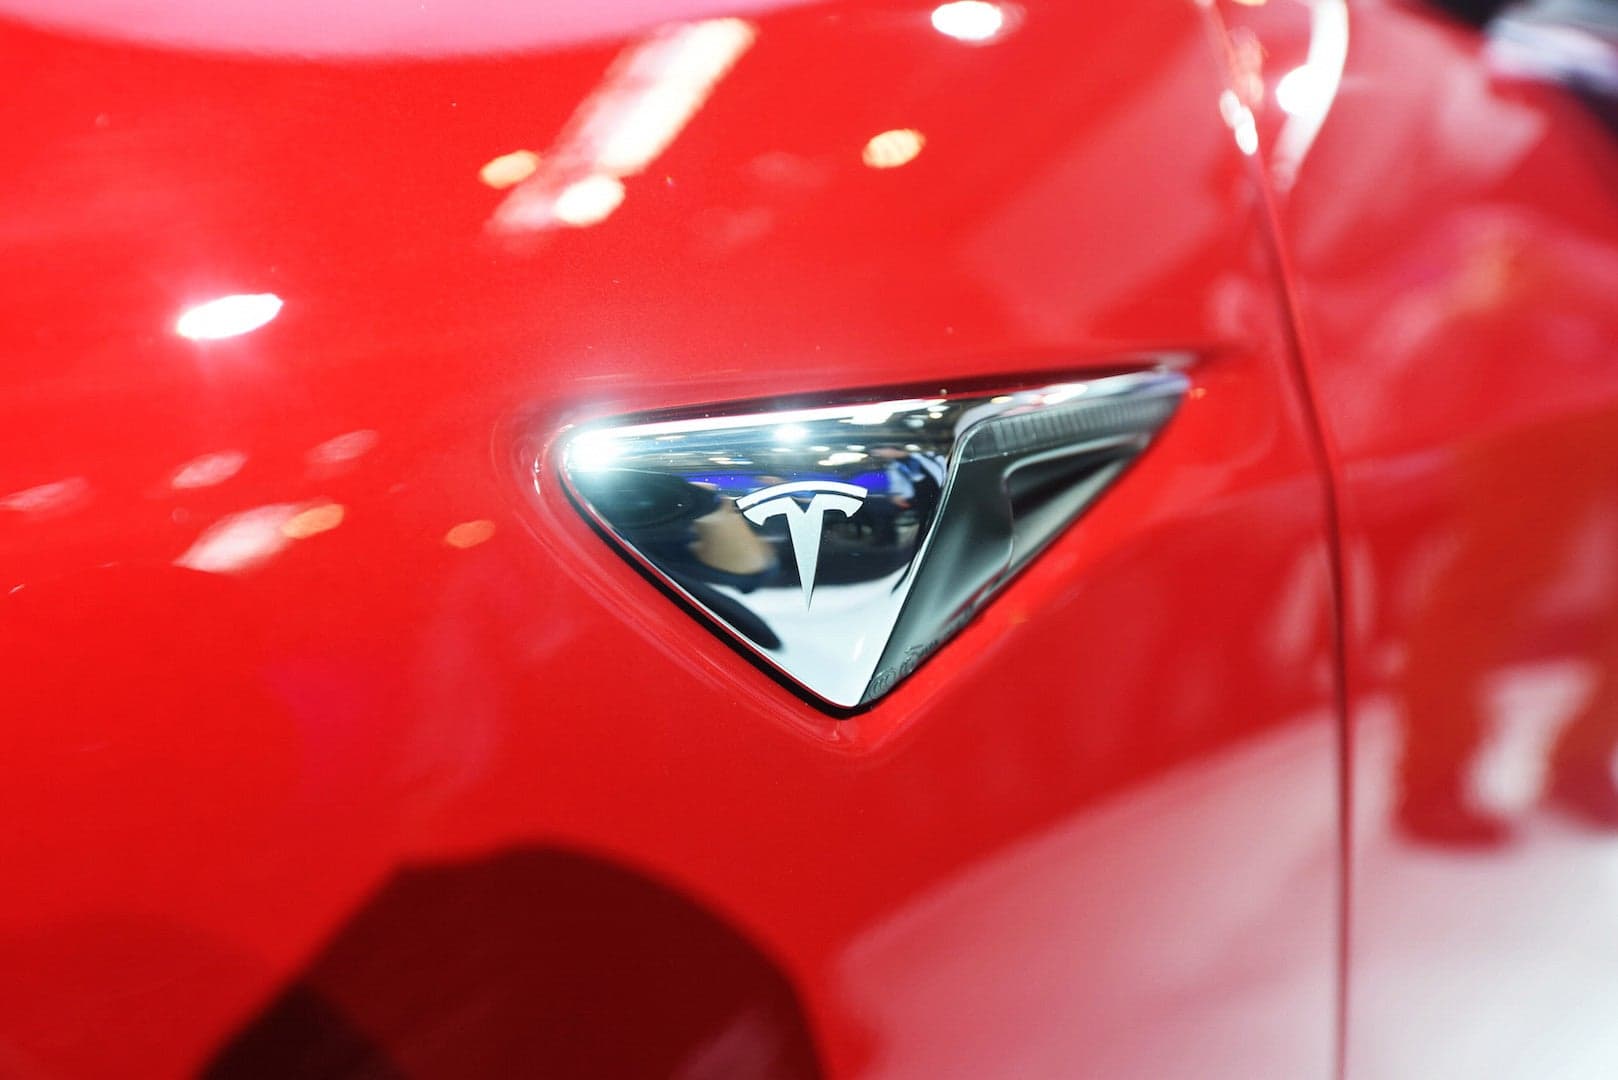 Tesla Inks Buyout of Energy Storage Company, Could Result in Solid-State Battery Source